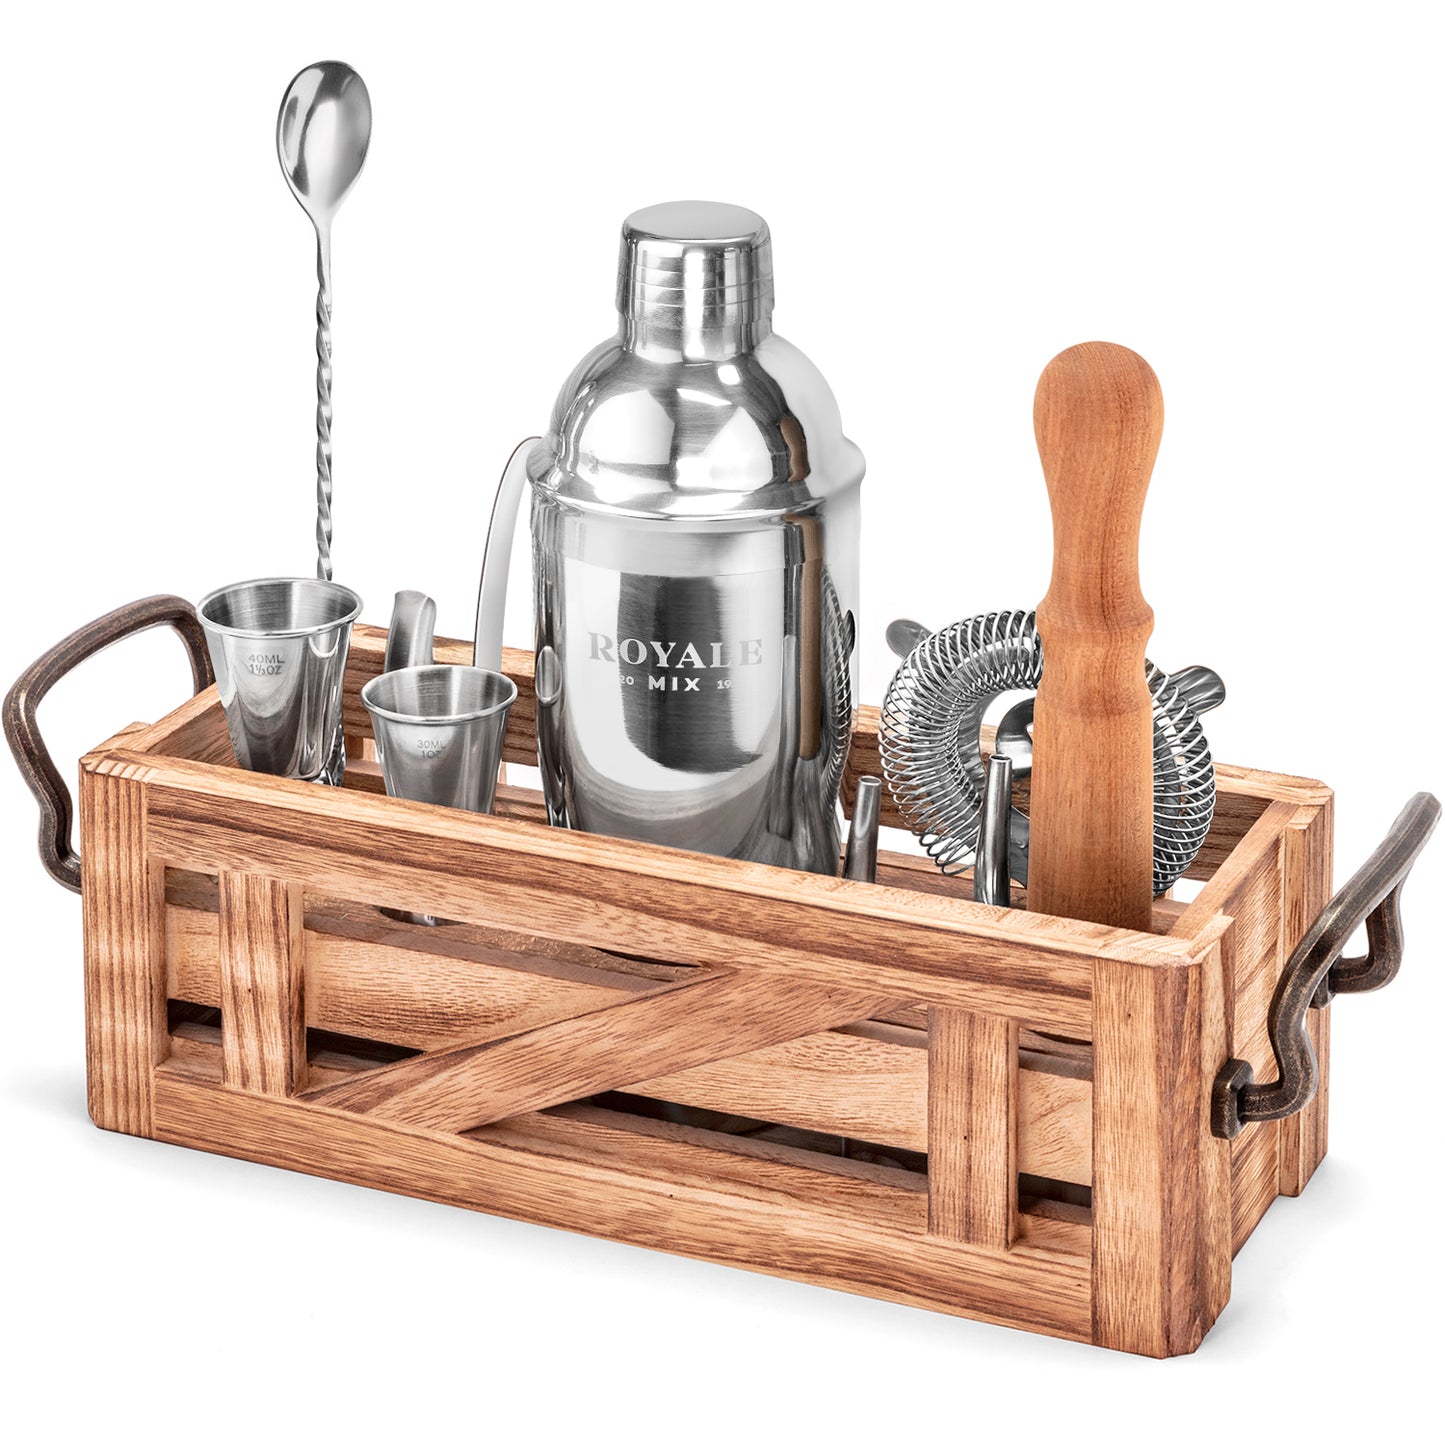 Bartender Kit with Rustic Organizer